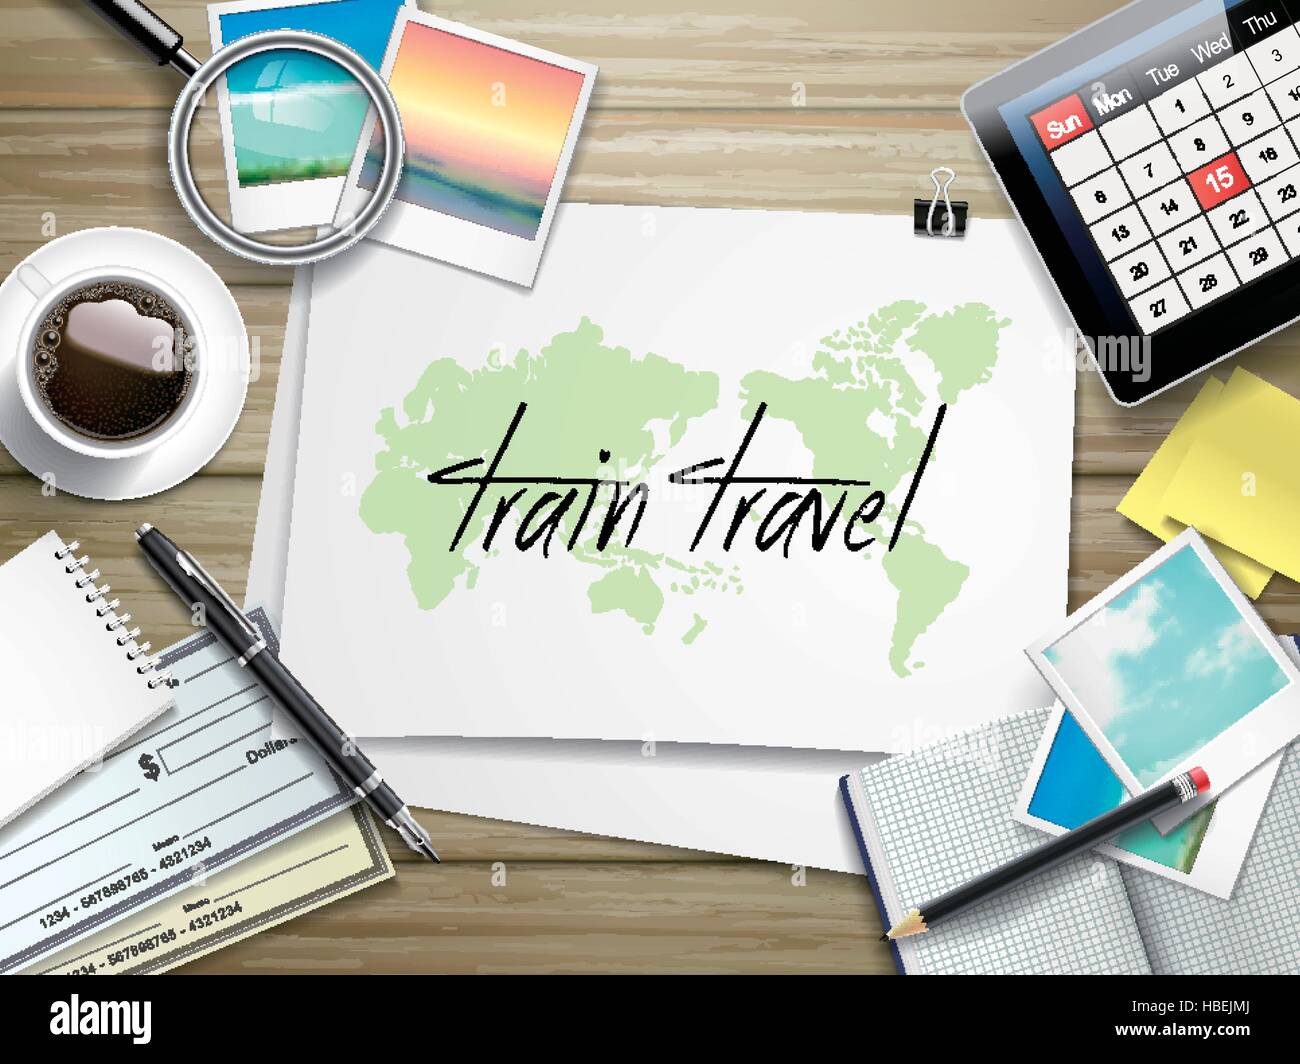 top view of travel items on wooden table with train travel written on paper Stock Vector